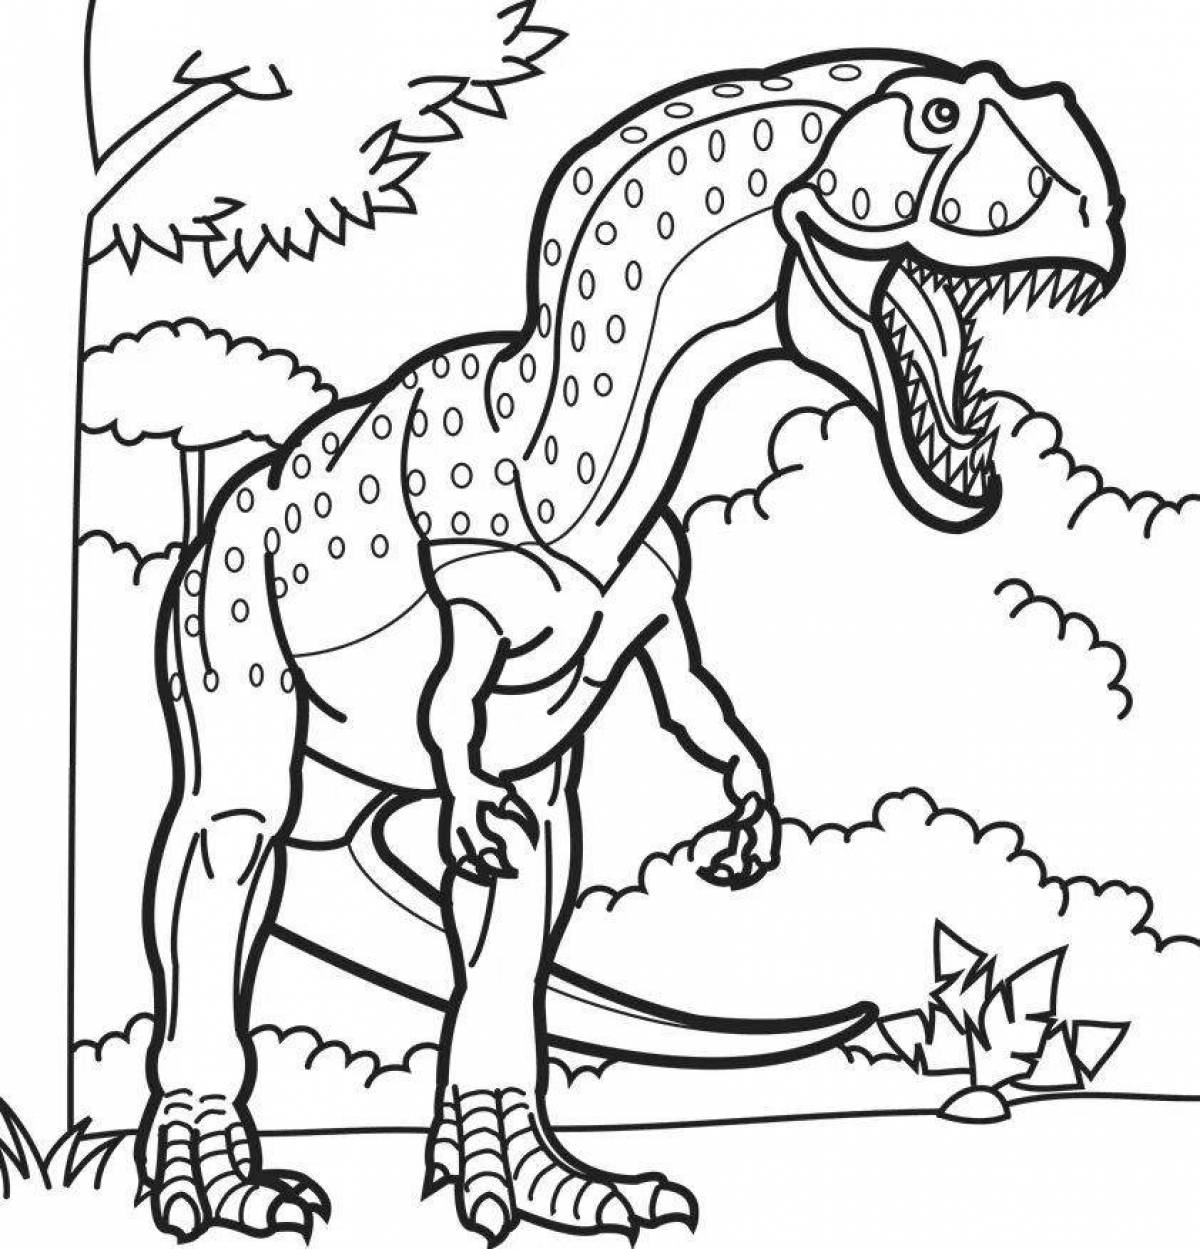 Awesome dinosaur drawings to color in